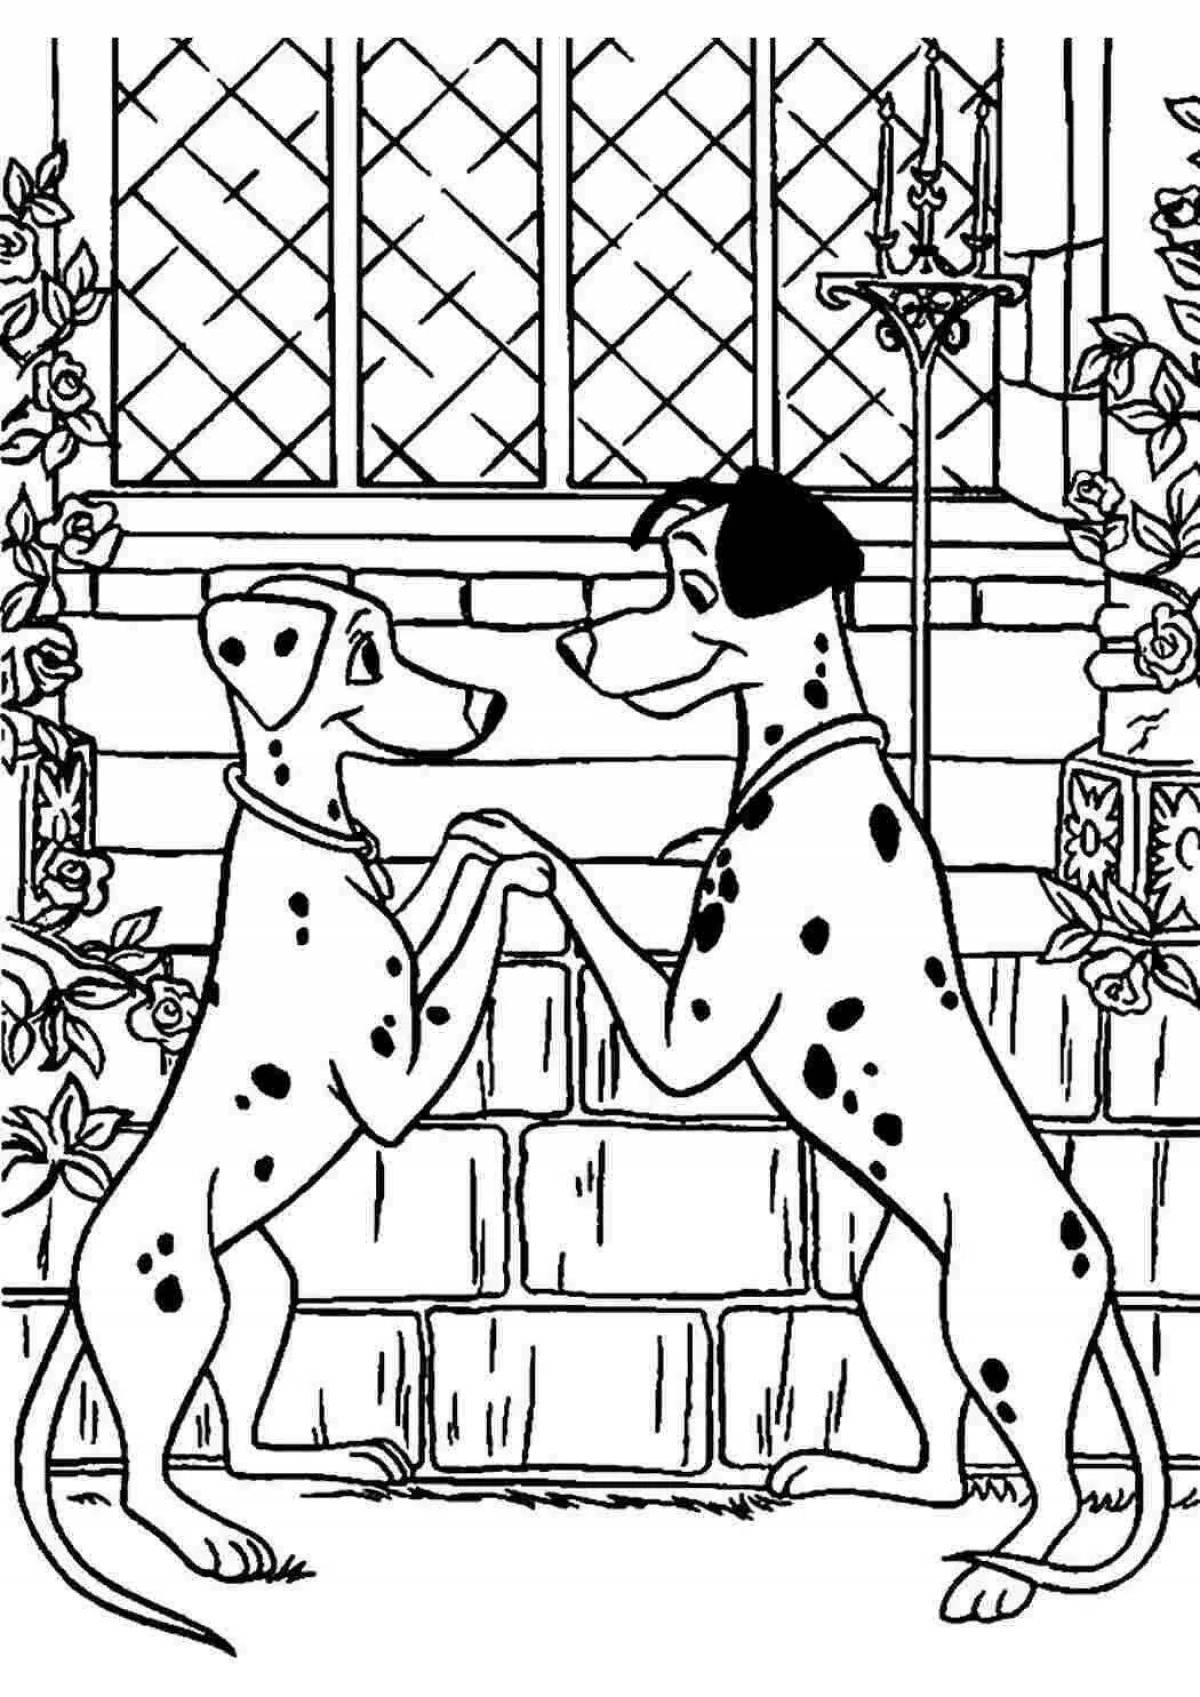 Amazing coloring page 101